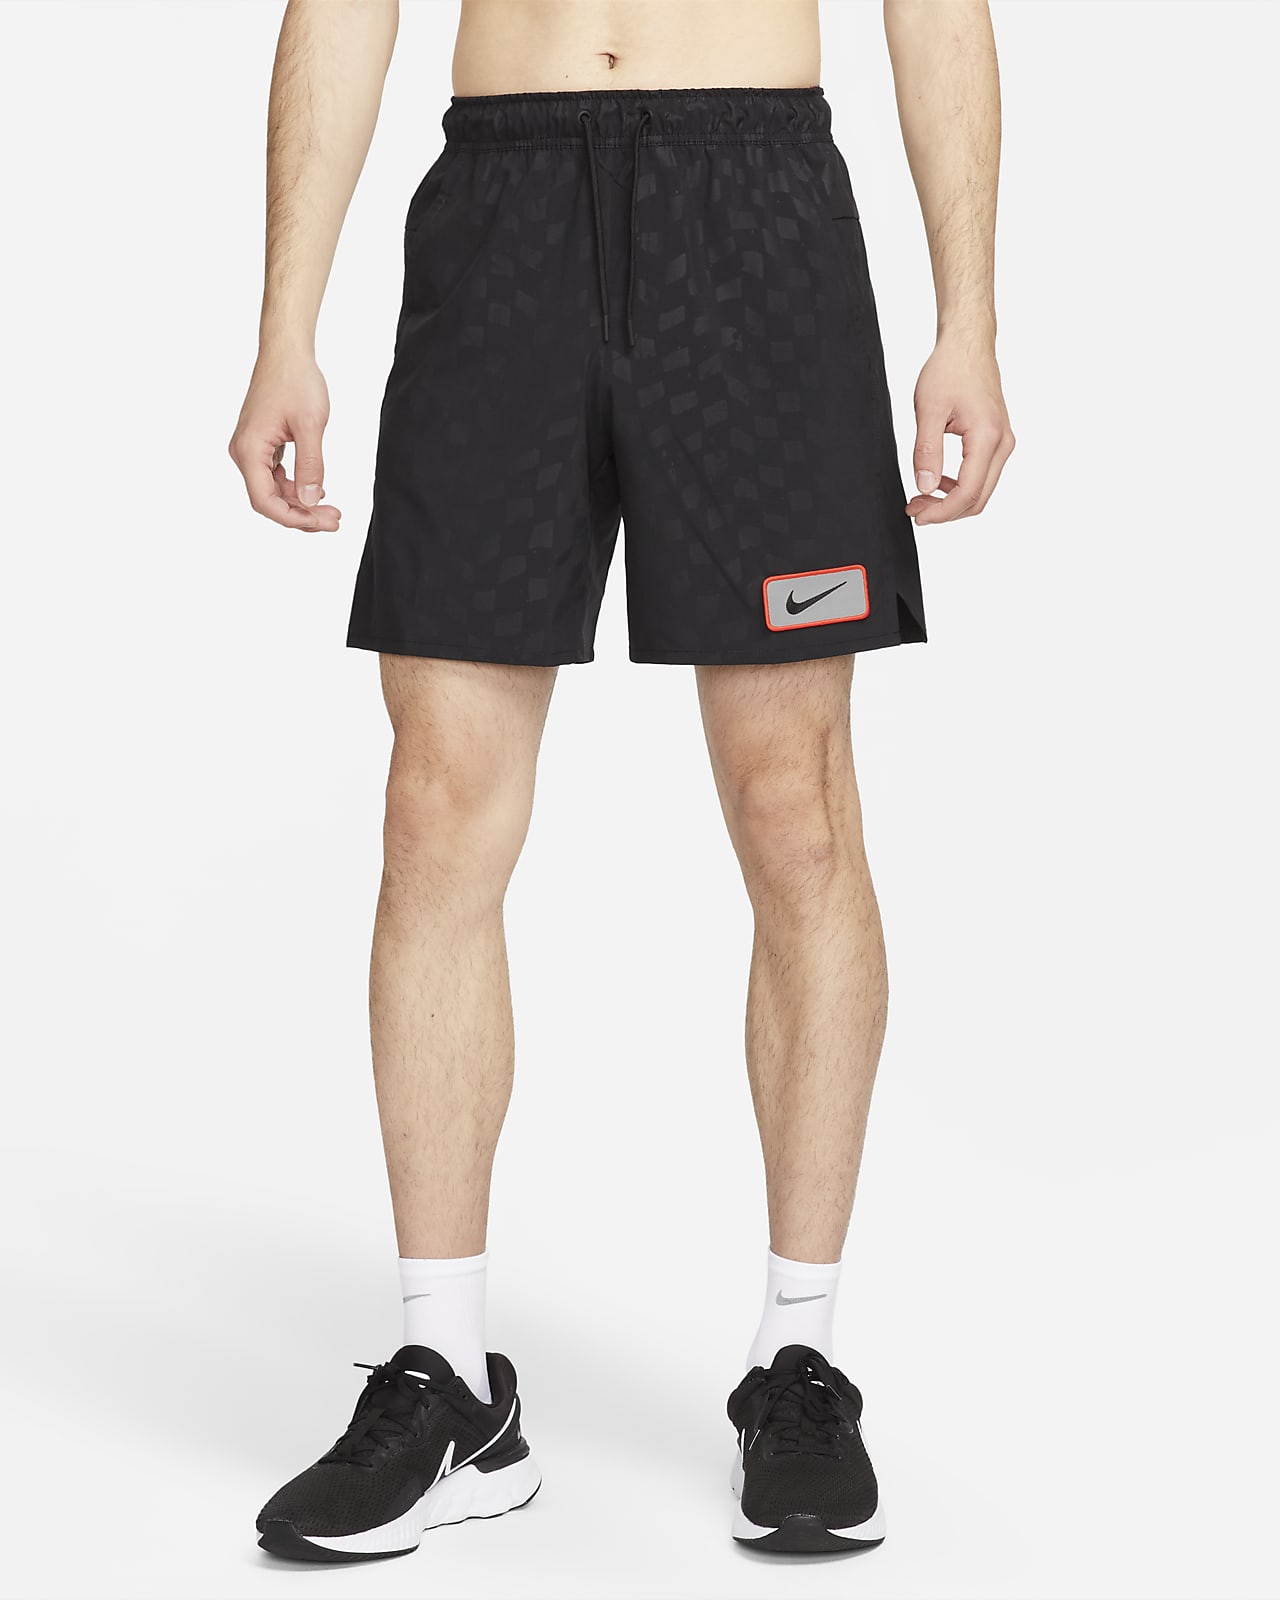 Nike Dri-FIT Unlimited Men's 18cm (approx.) Woven Unlined Fitness Shorts